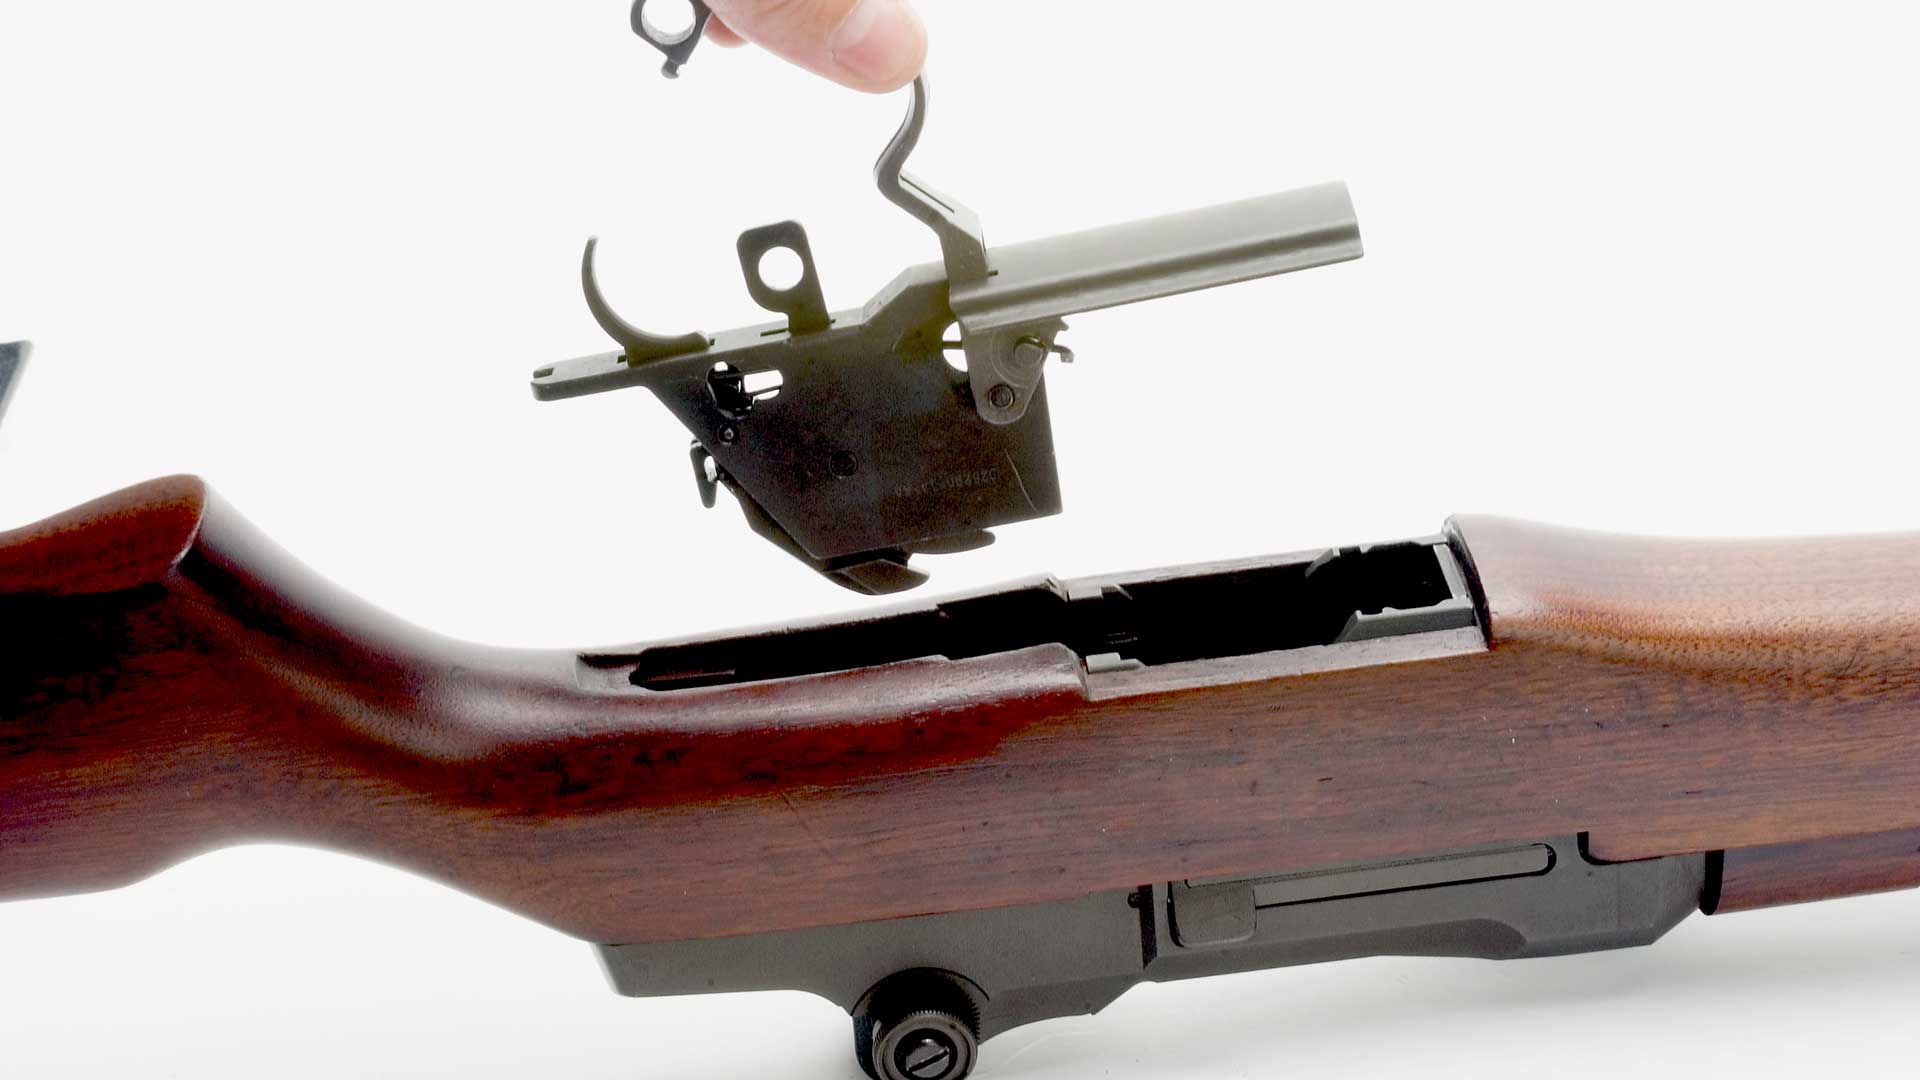 upside down rifle parts gun hand removal